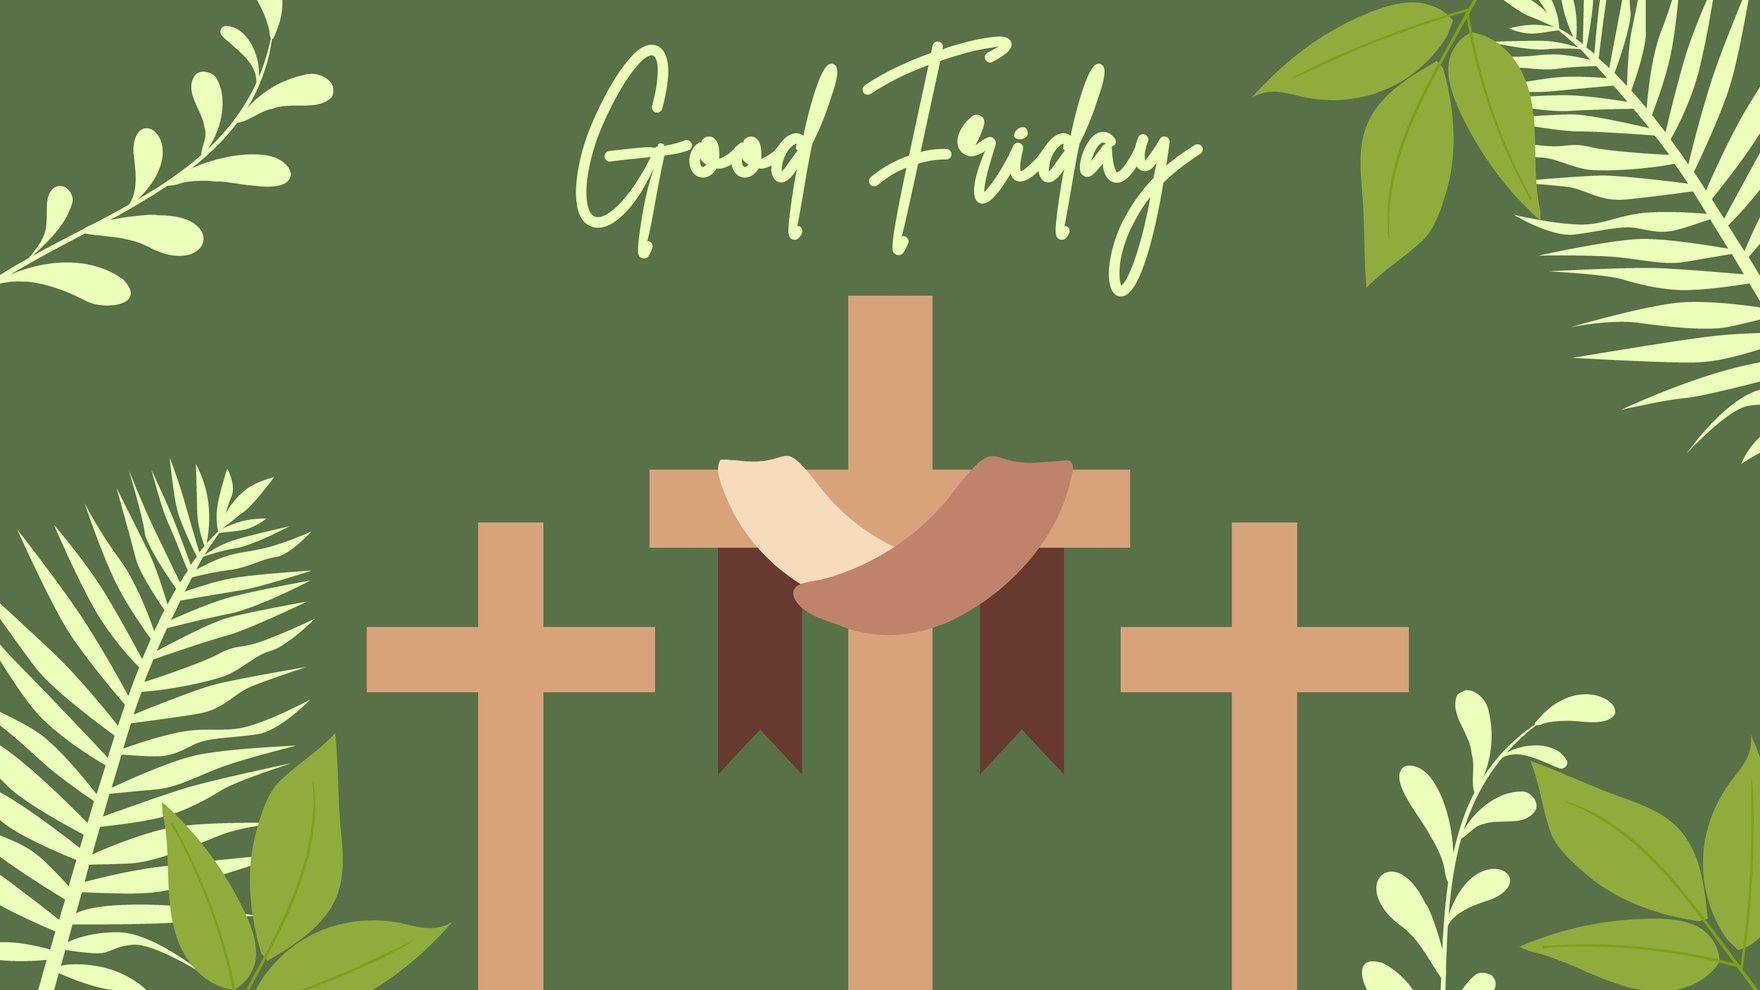 Good Friday Green Background